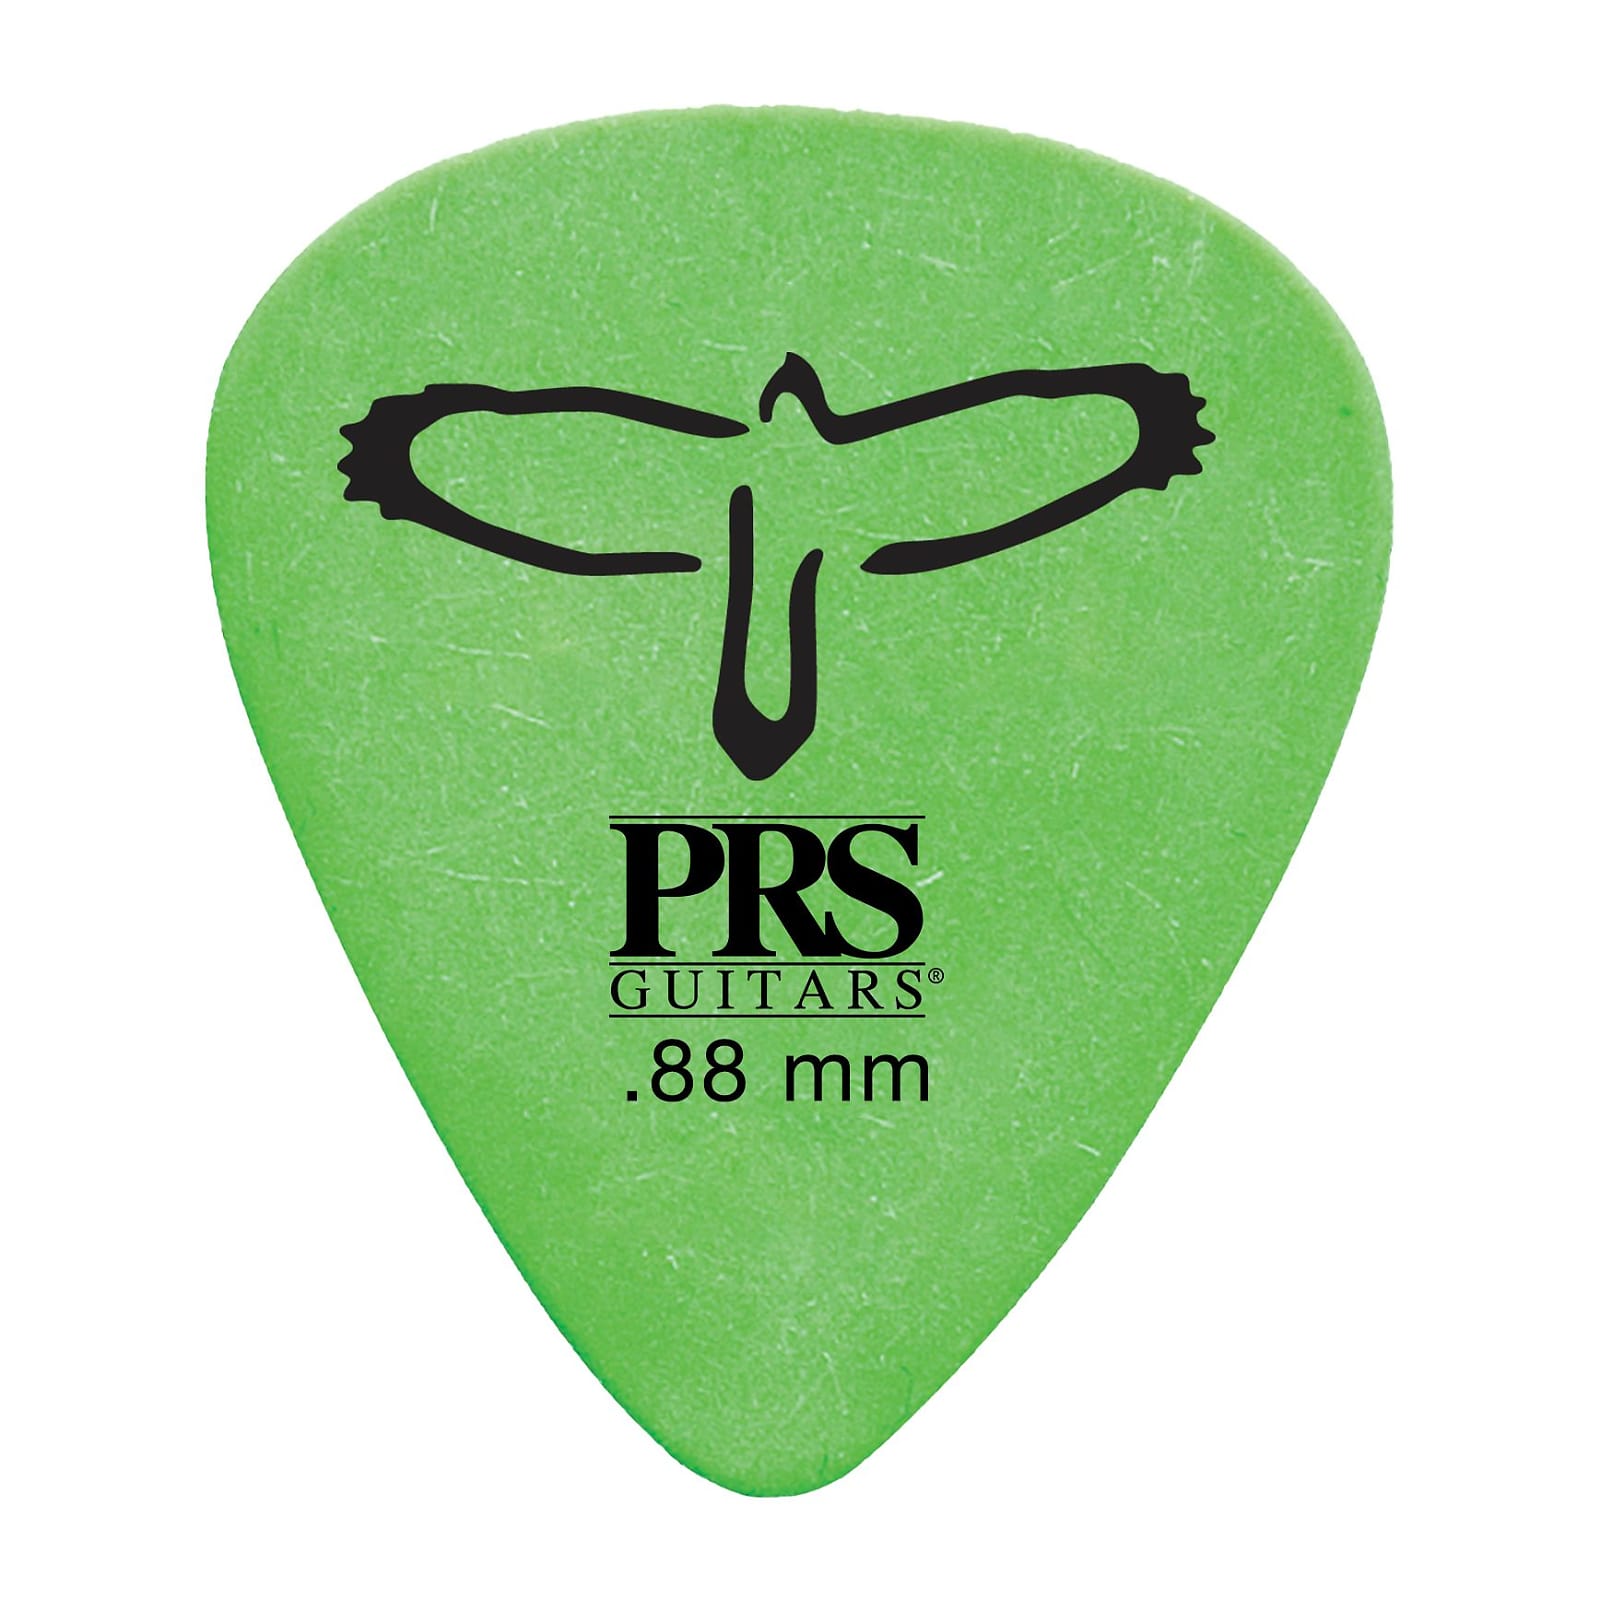 Paul Reed Smith PRS Delrin Guitar Picks (12) (0.88mm - Green)